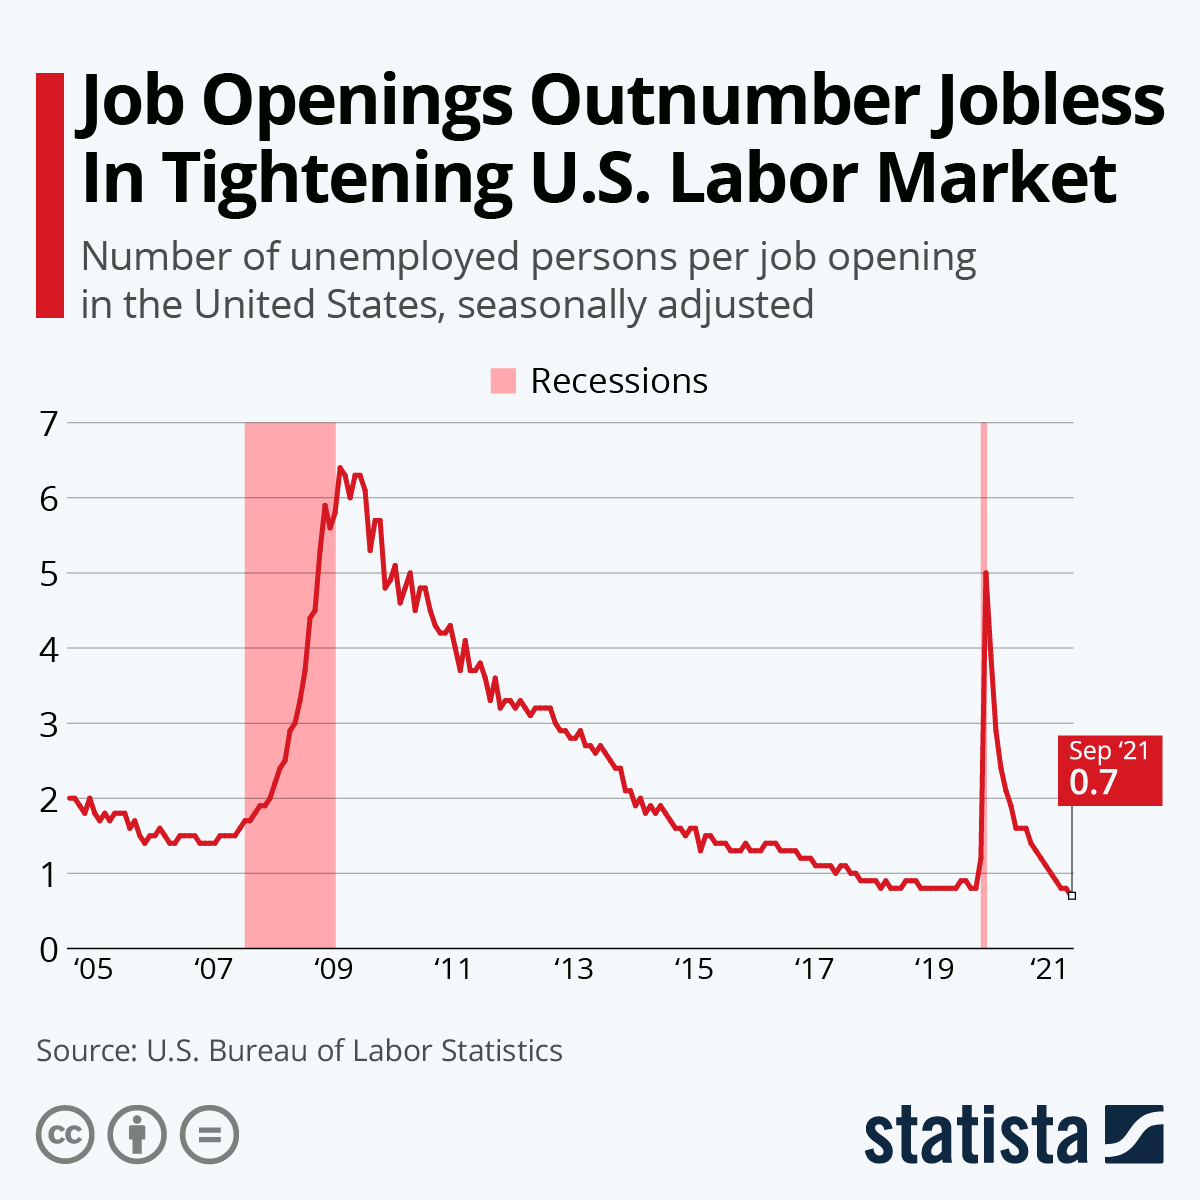 Job Openings Outnumber Jobless In Tightening U.S. Labor Market